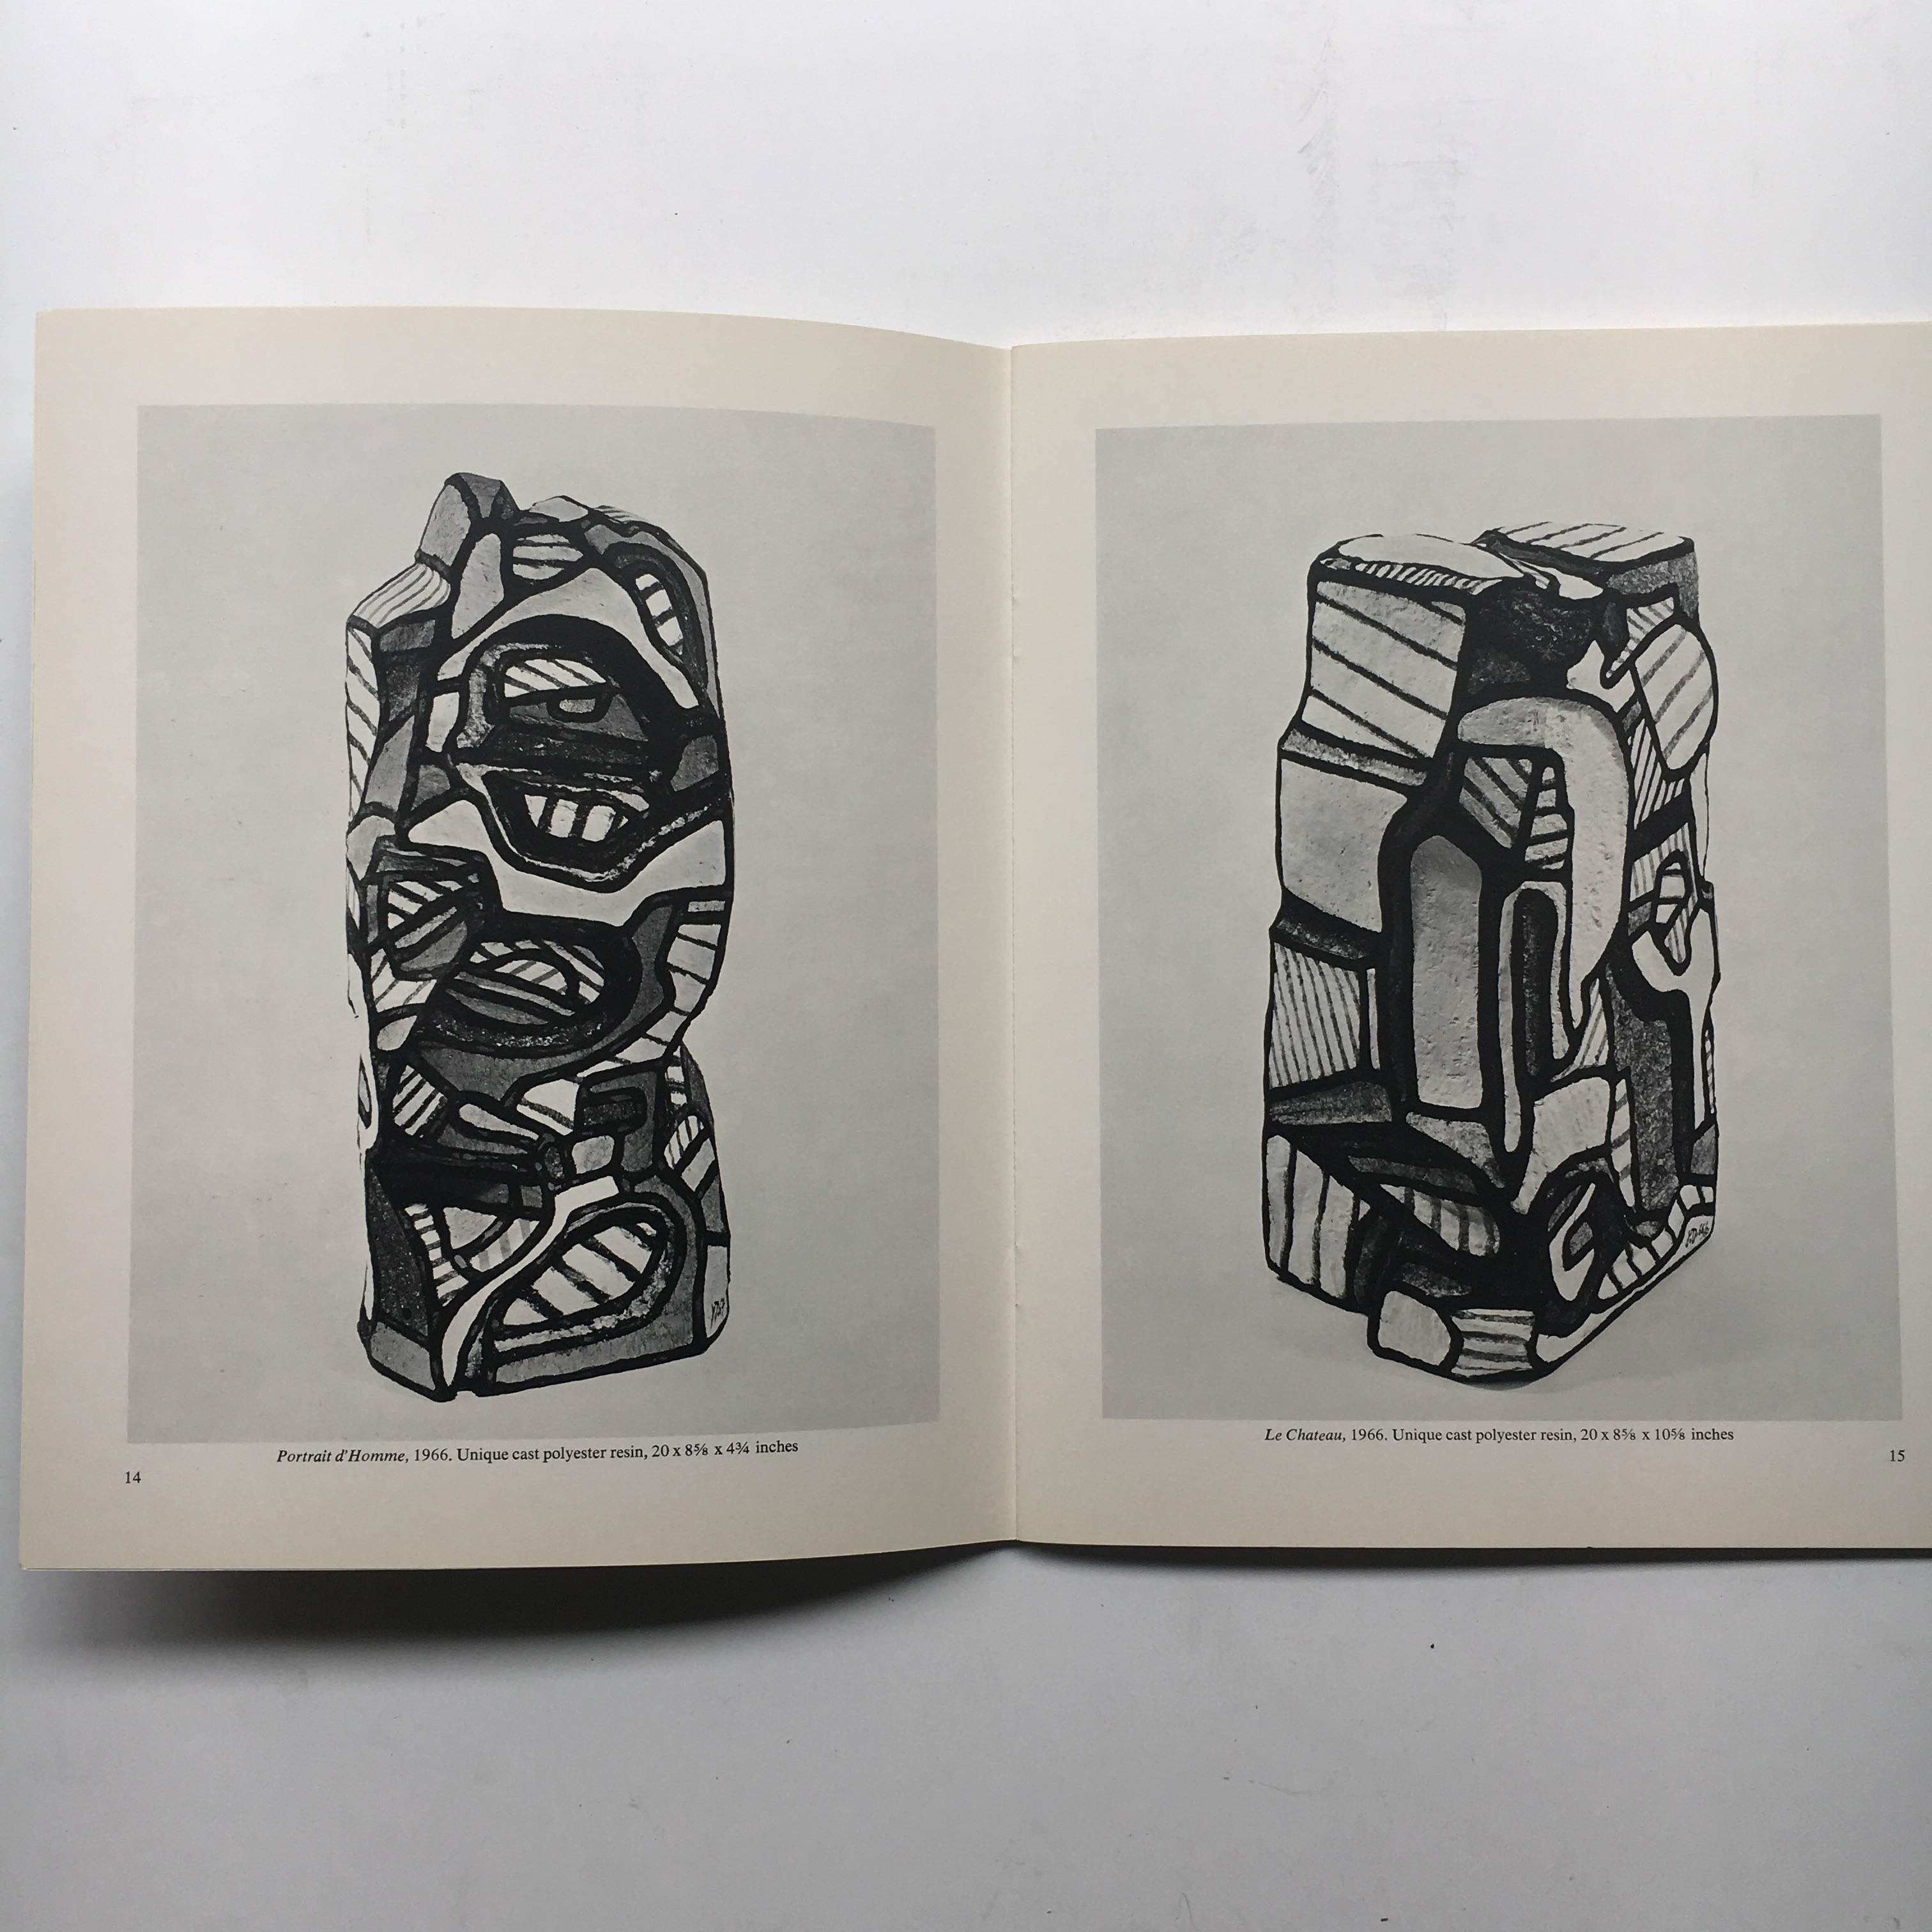 First Edition, published by The Pace Gallery, New York, 1968.

Jean Dubuffet's paintings from the early 1940s were followed by a series of works in which he employed unorthodox materials such as cement, plaster, tar, and asphalt-scraped, carved and